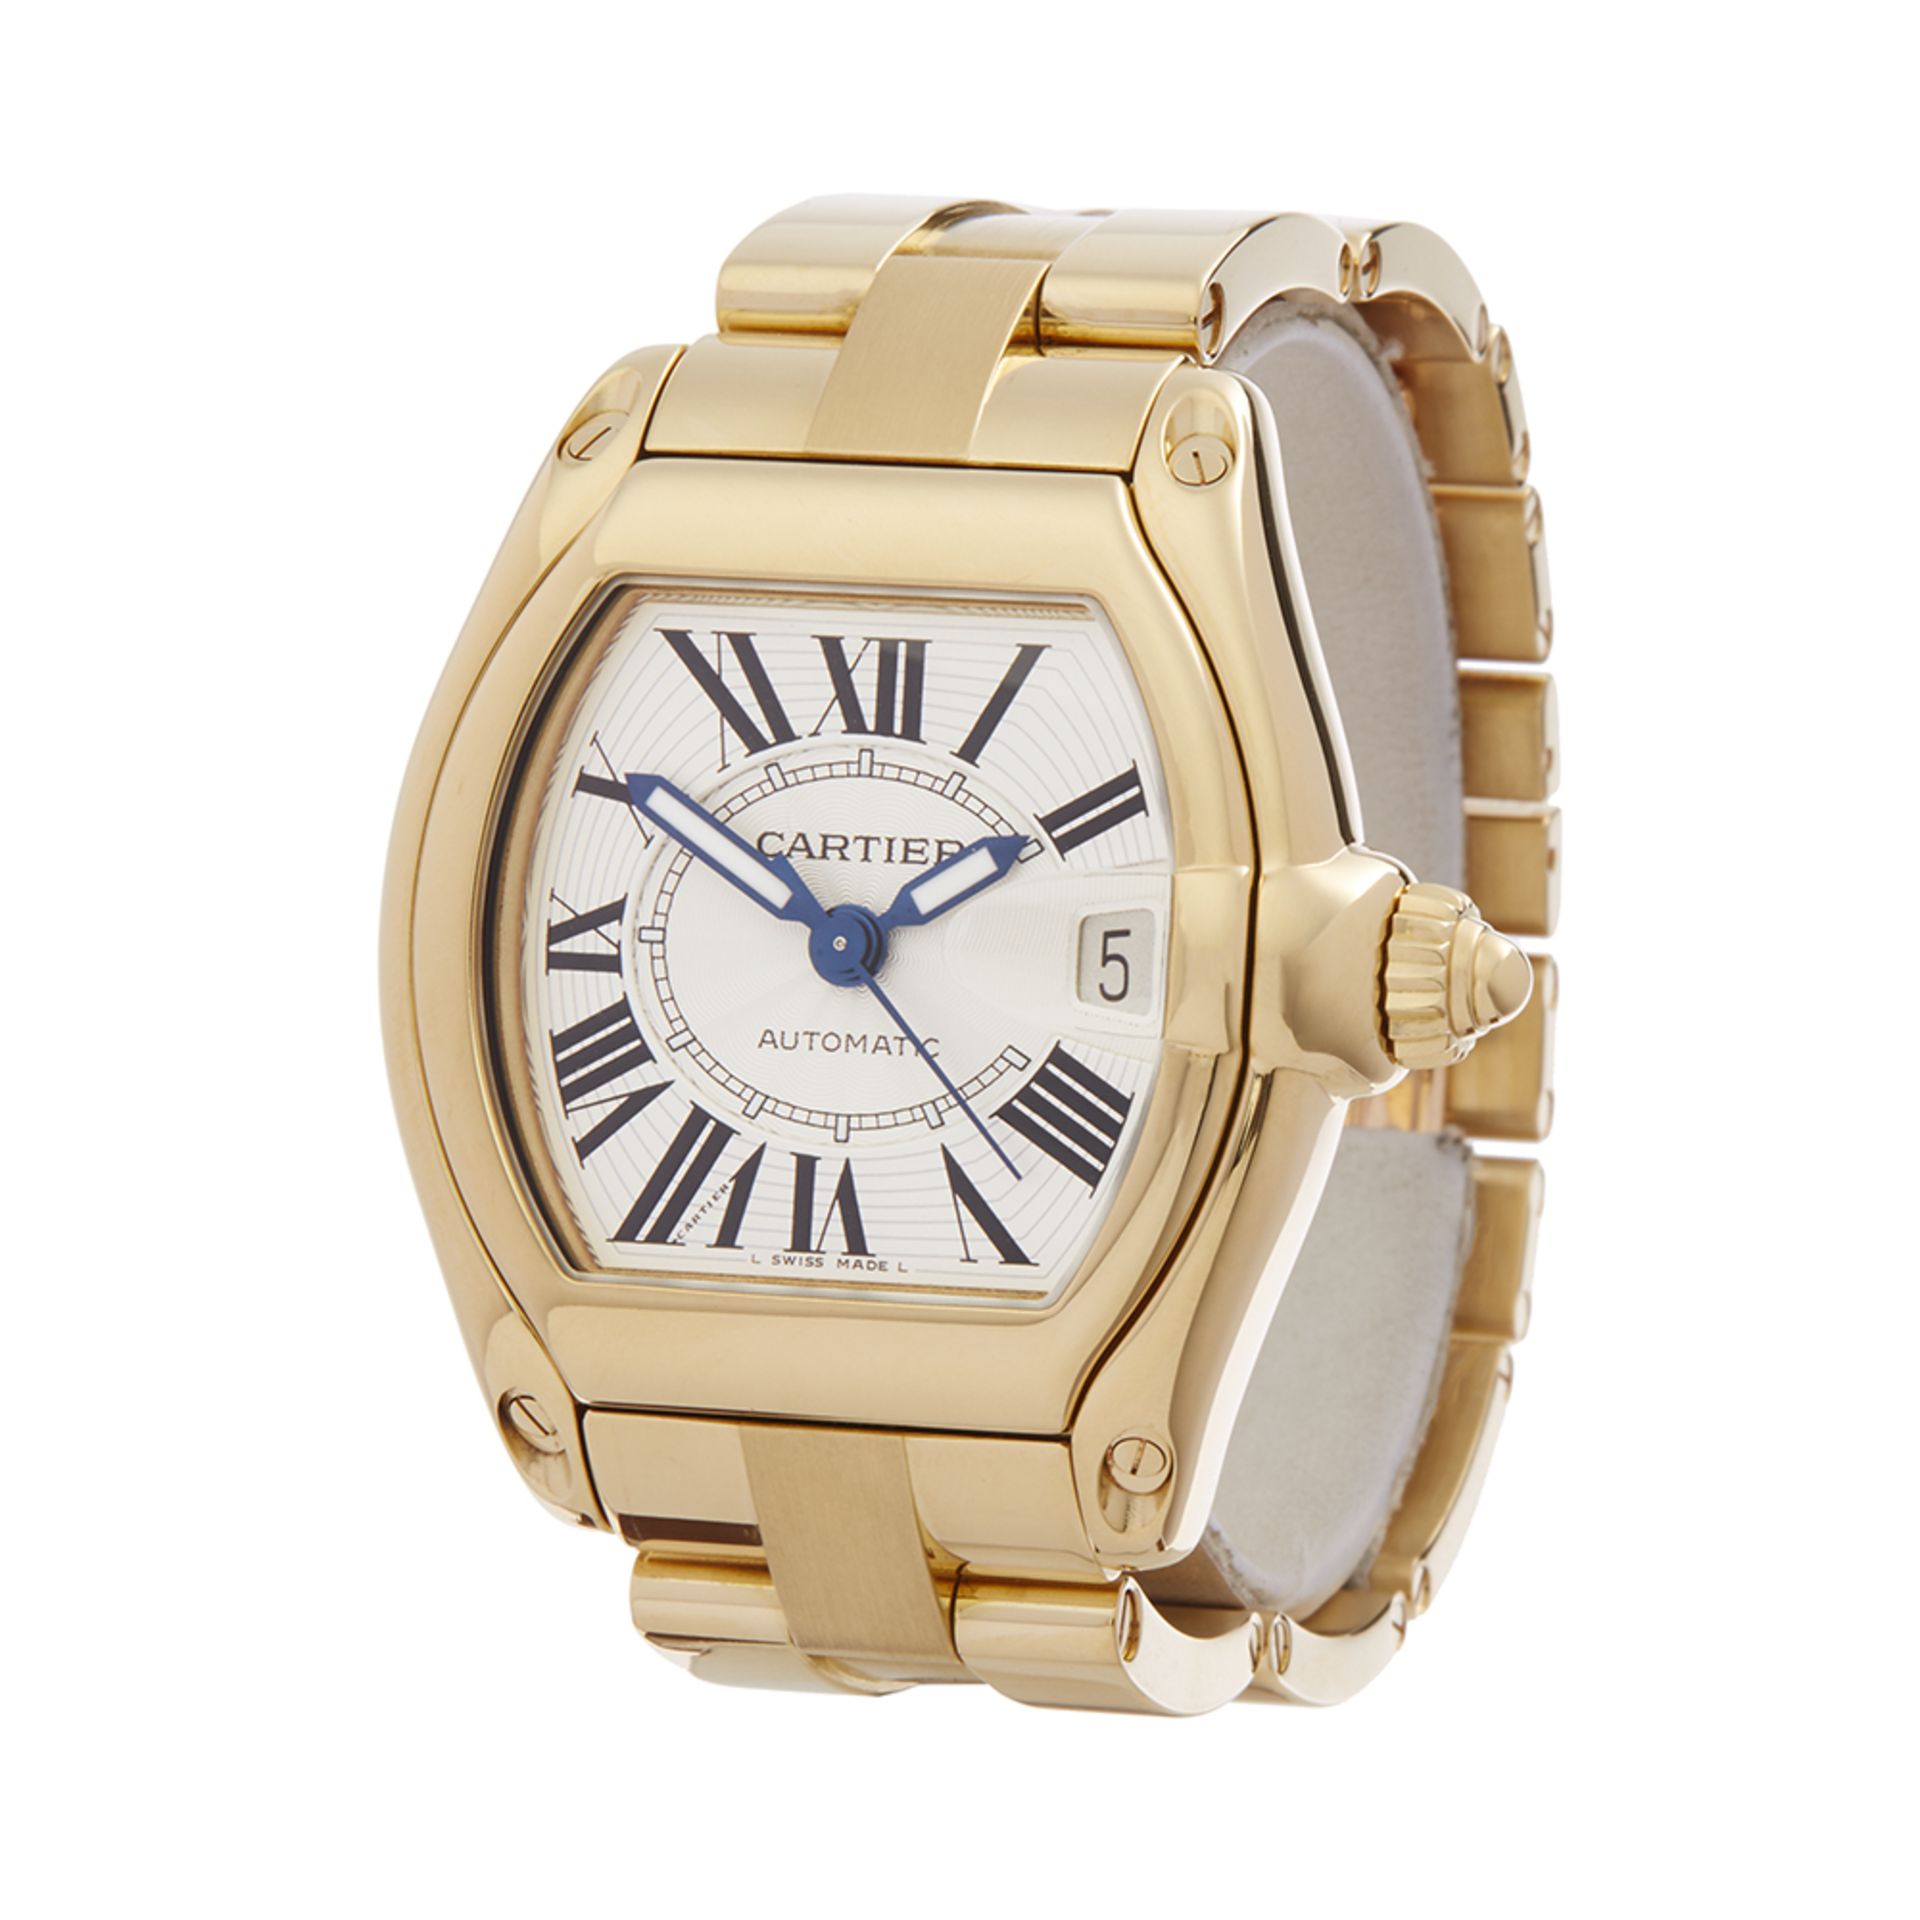 Cartier Roadster 18K Yellow Gold - 2524 or W620005V2